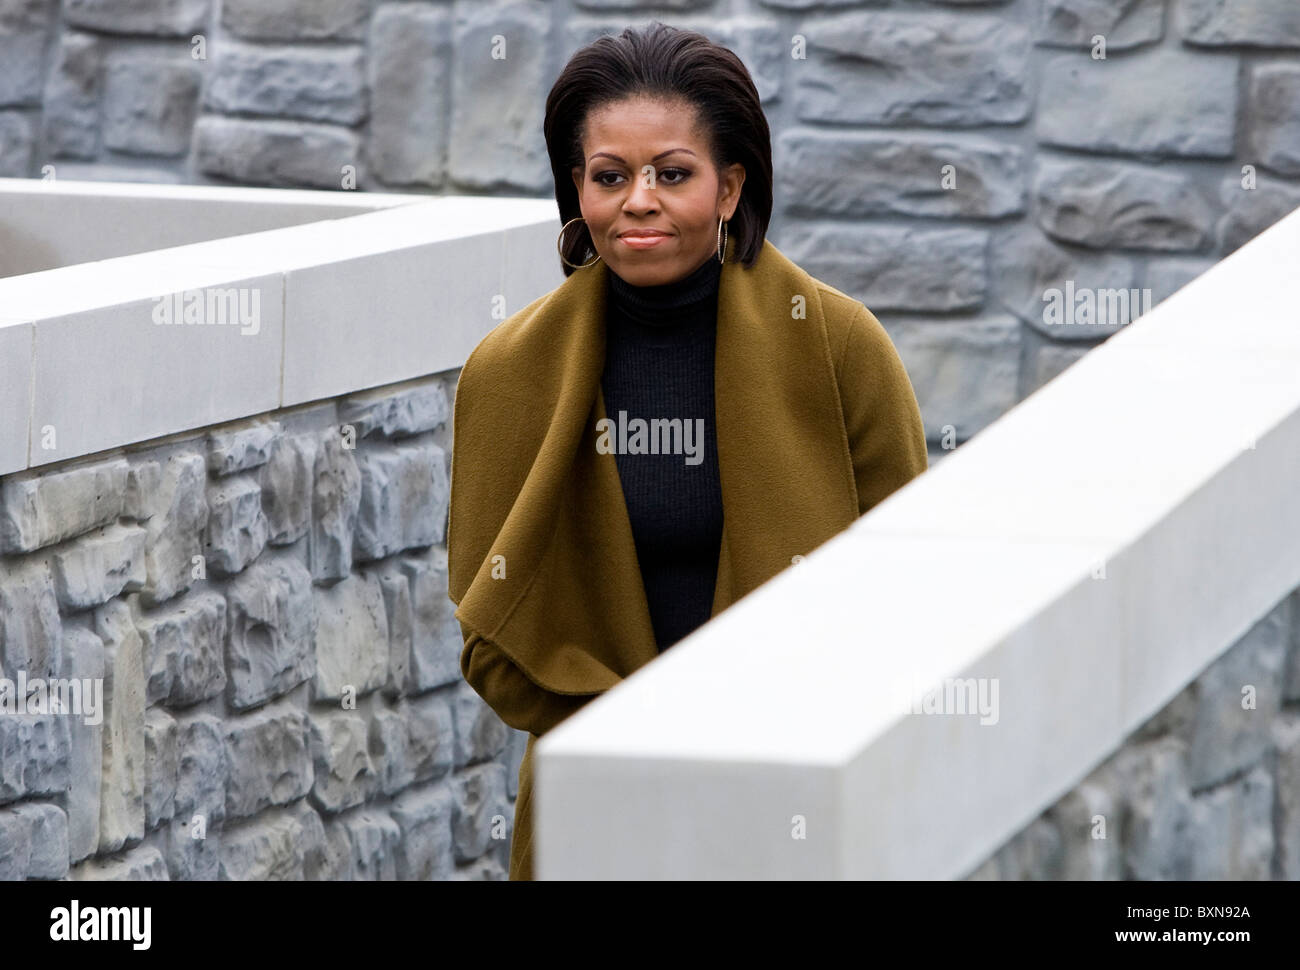 First Lady Michelle Obama. Stockfoto